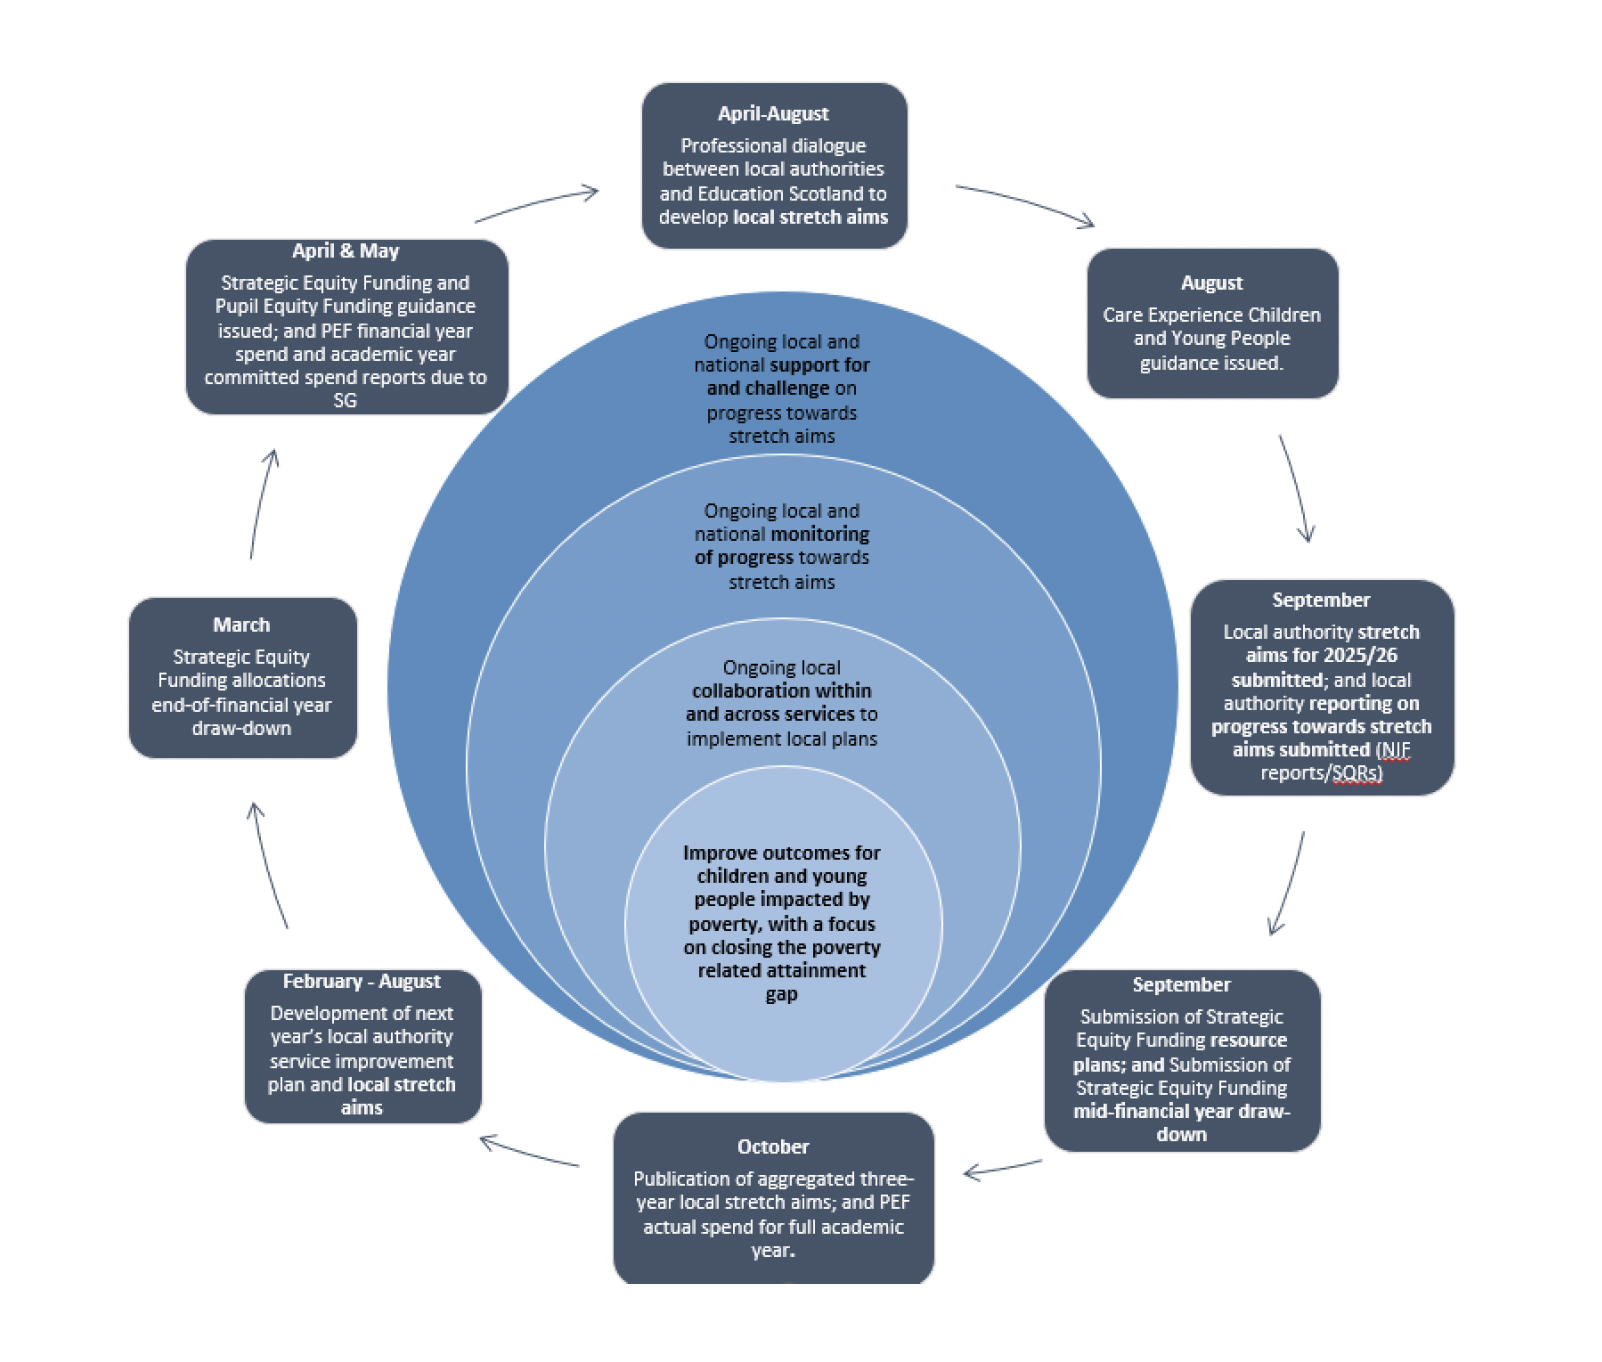 Displays the planning and reporting cycle for the Scottish Attainment Challenge for 2023/24